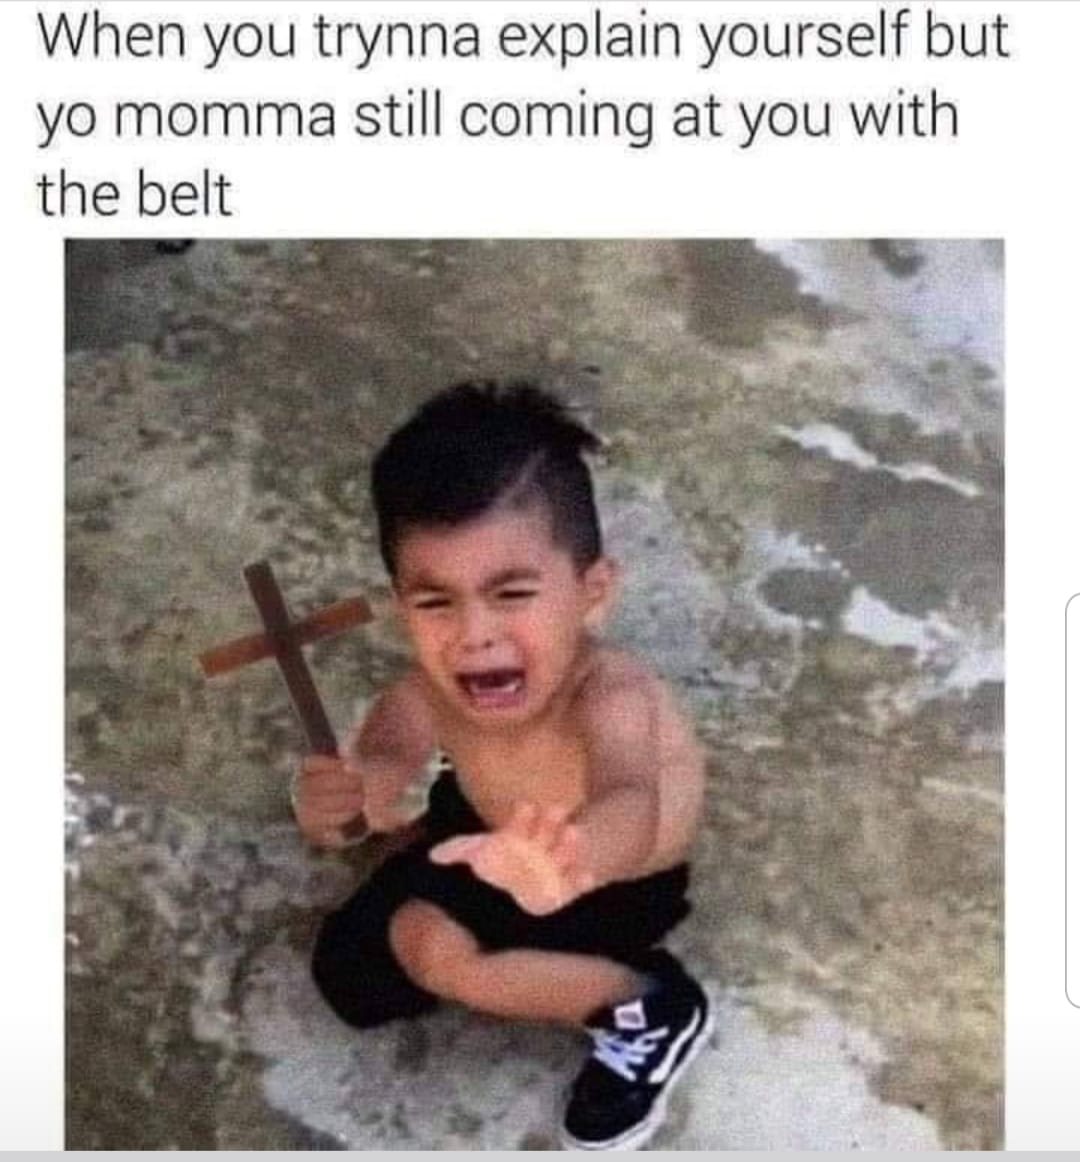 Childhood Memes - crying kid with cross meme - When you trynna explain yourself but yo momma still coming at you with the belt